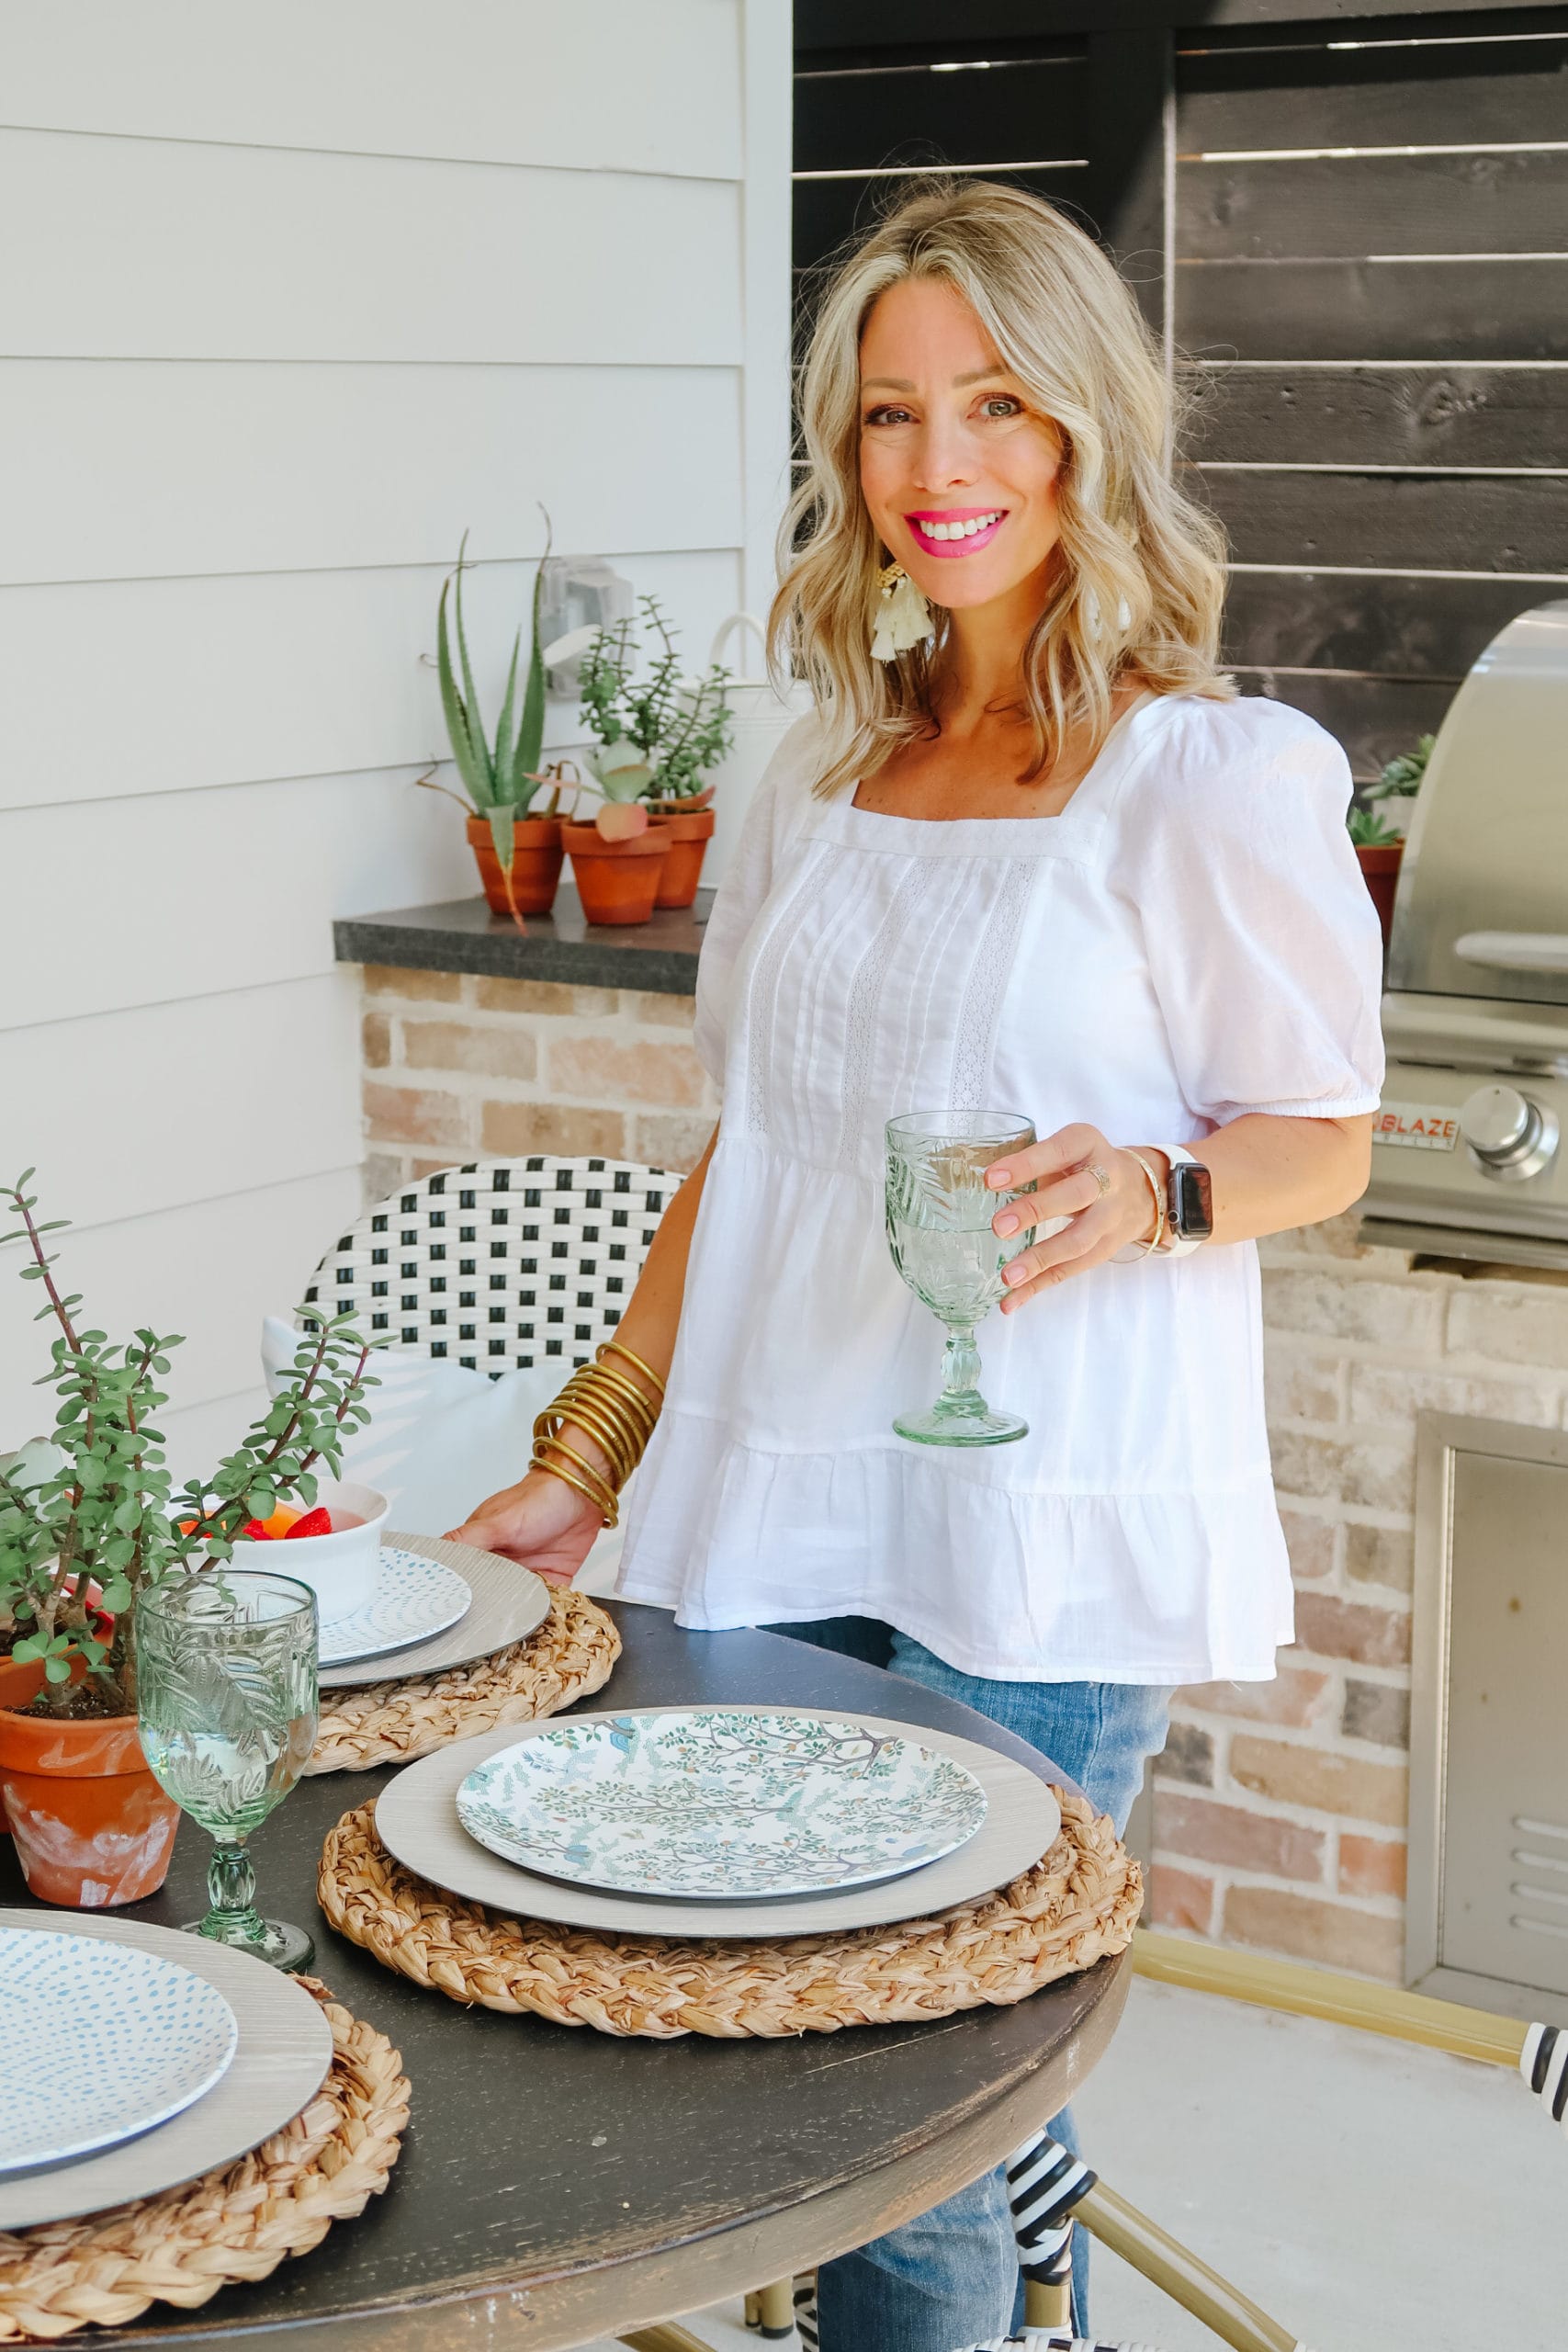 Patio Update & New Home Decor Styles from Shutterfly